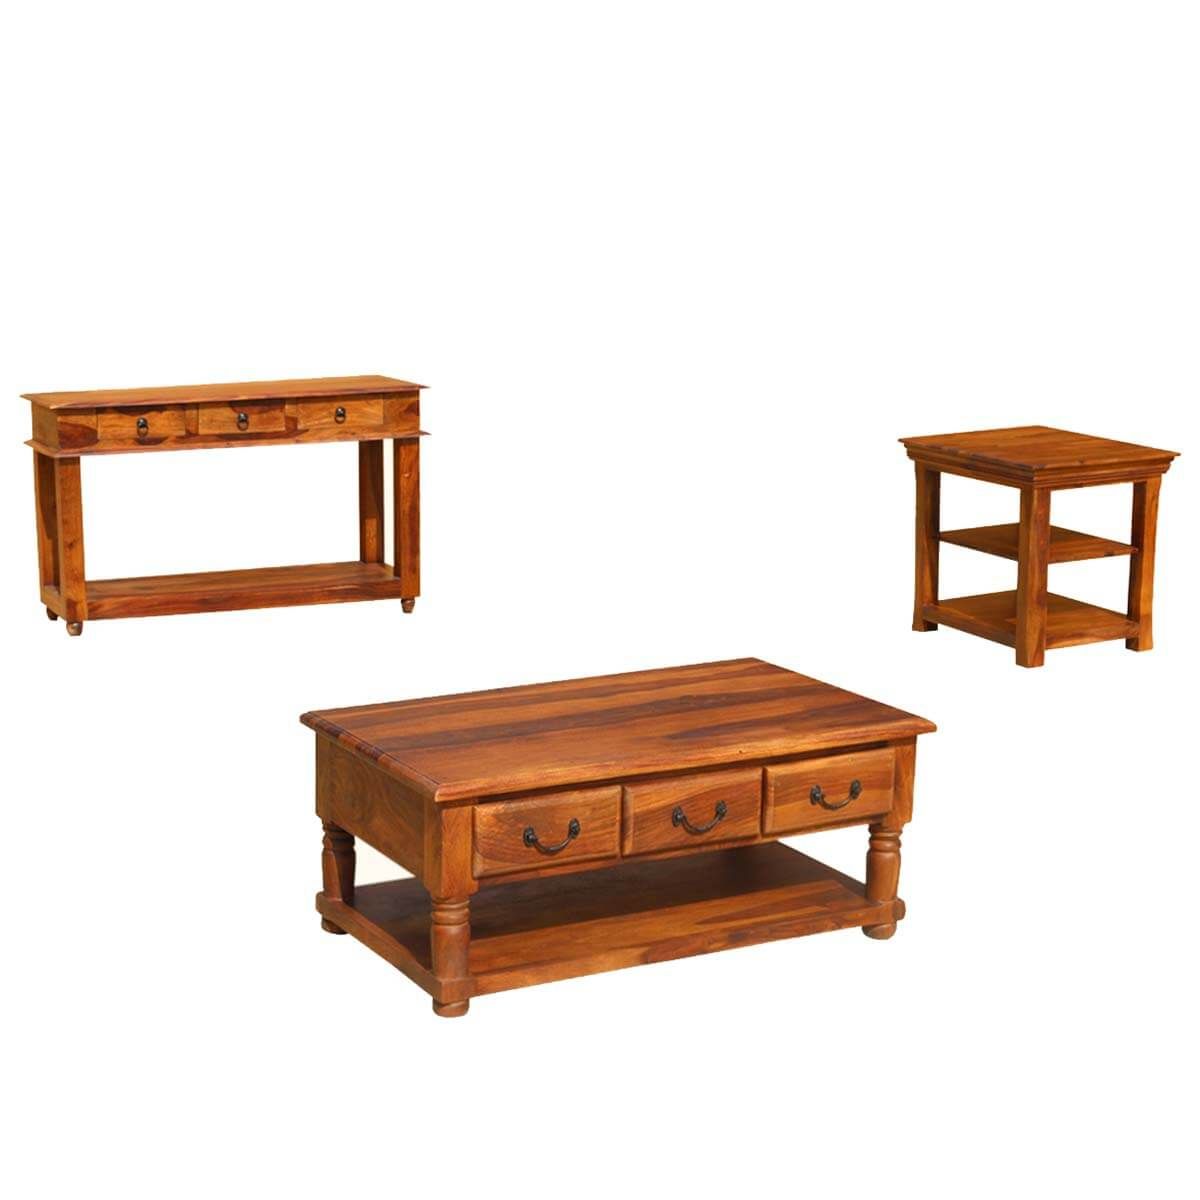 Early American Solid Wood Console Coffee & Accent Table With Regard To Rustic Espresso Wood Console Tables (View 14 of 20)